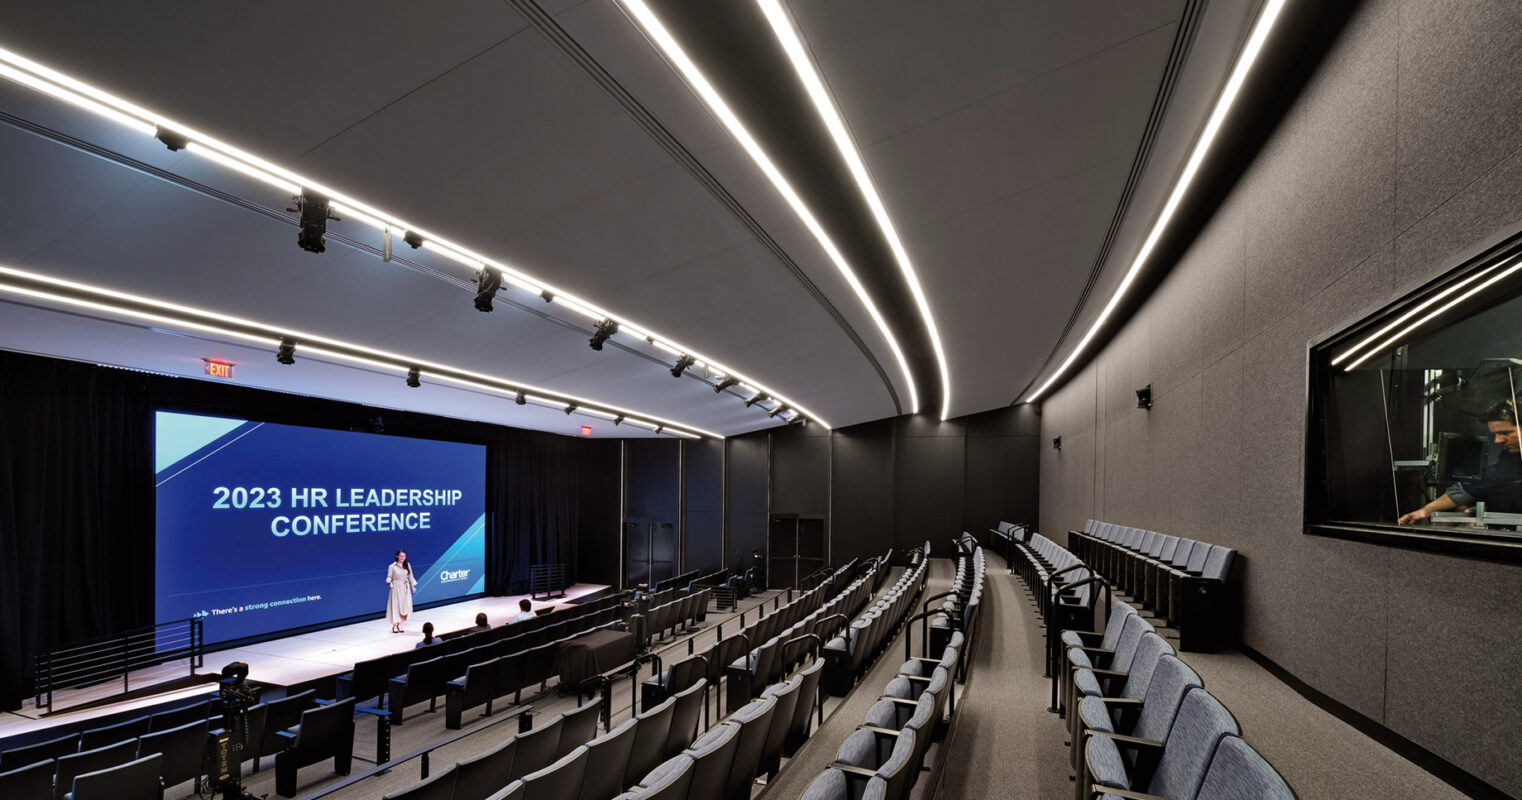 Modern conference hall with led lighting before the start of a leadership conference.